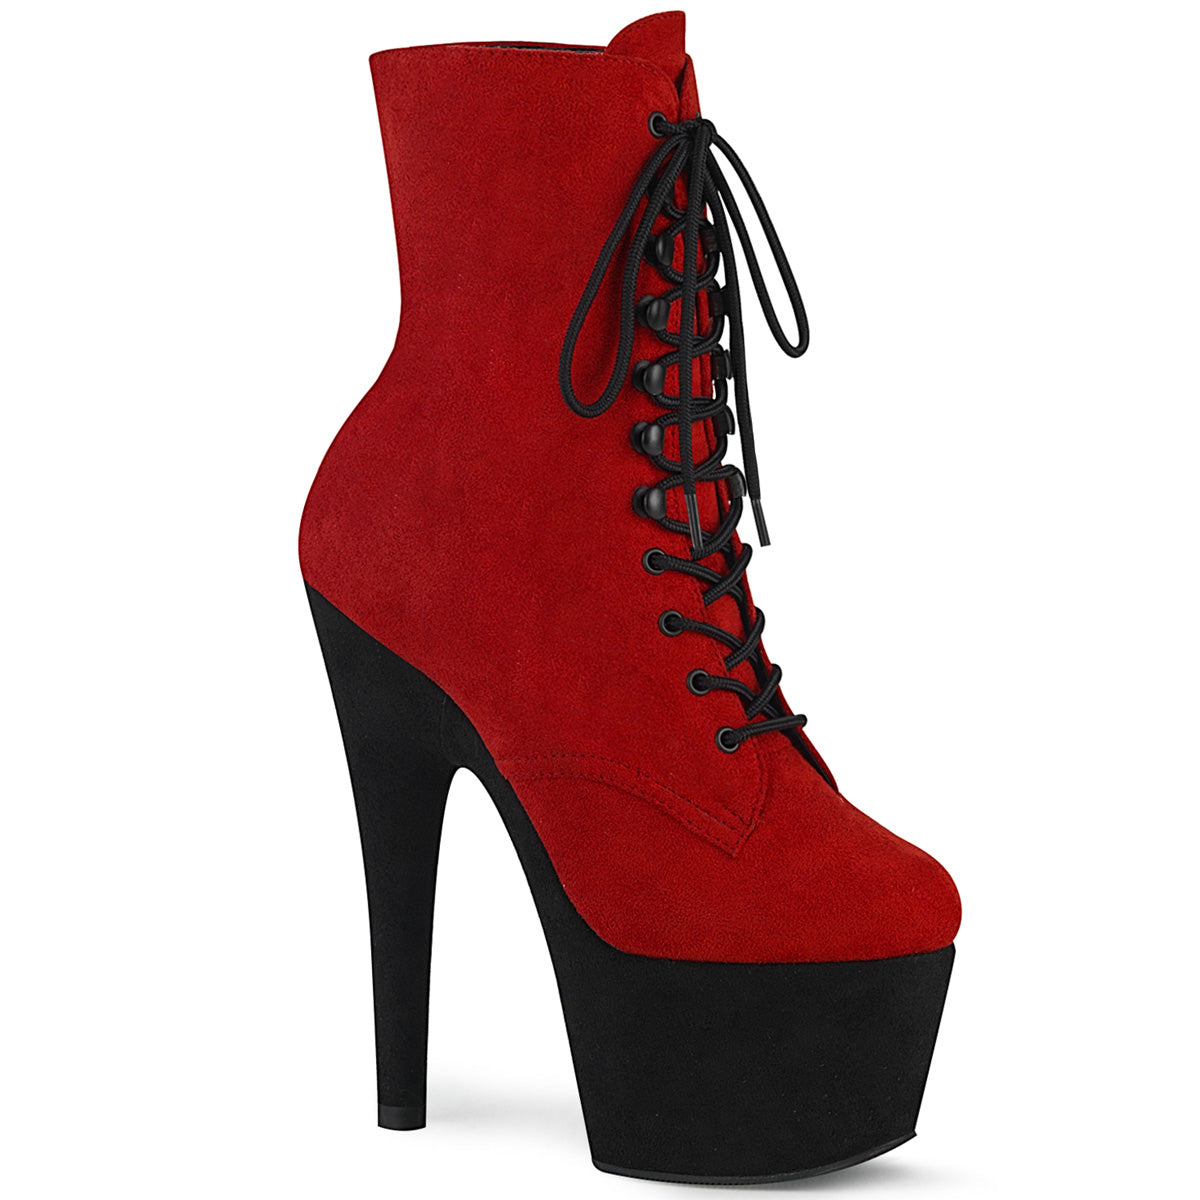 ADORE-1020FSTT Strippers Heels Pleaser Platforms (Exotic Dancing) Red Faux Suede/Blk Faux Suede